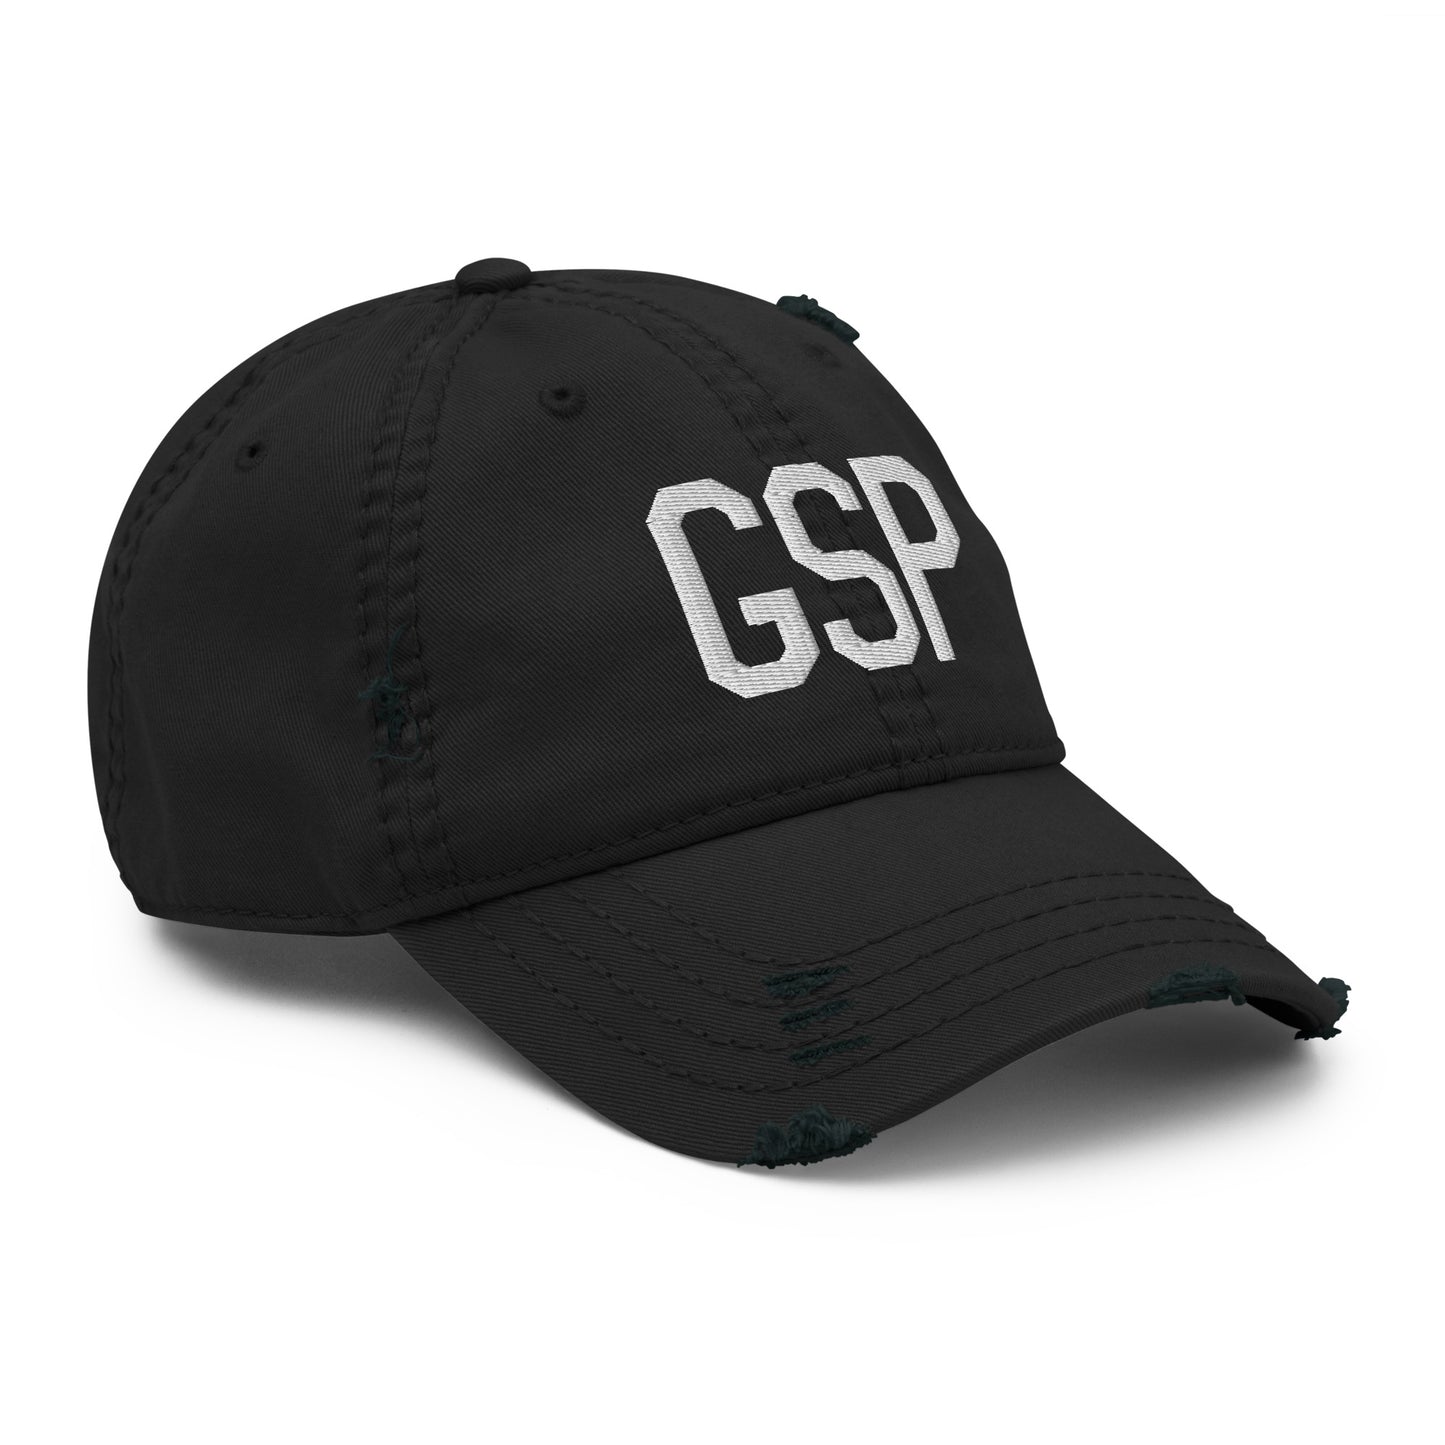 Airport Code Distressed Hat - White • GSP Greenville-Spartanburg • YHM Designs - Image 12